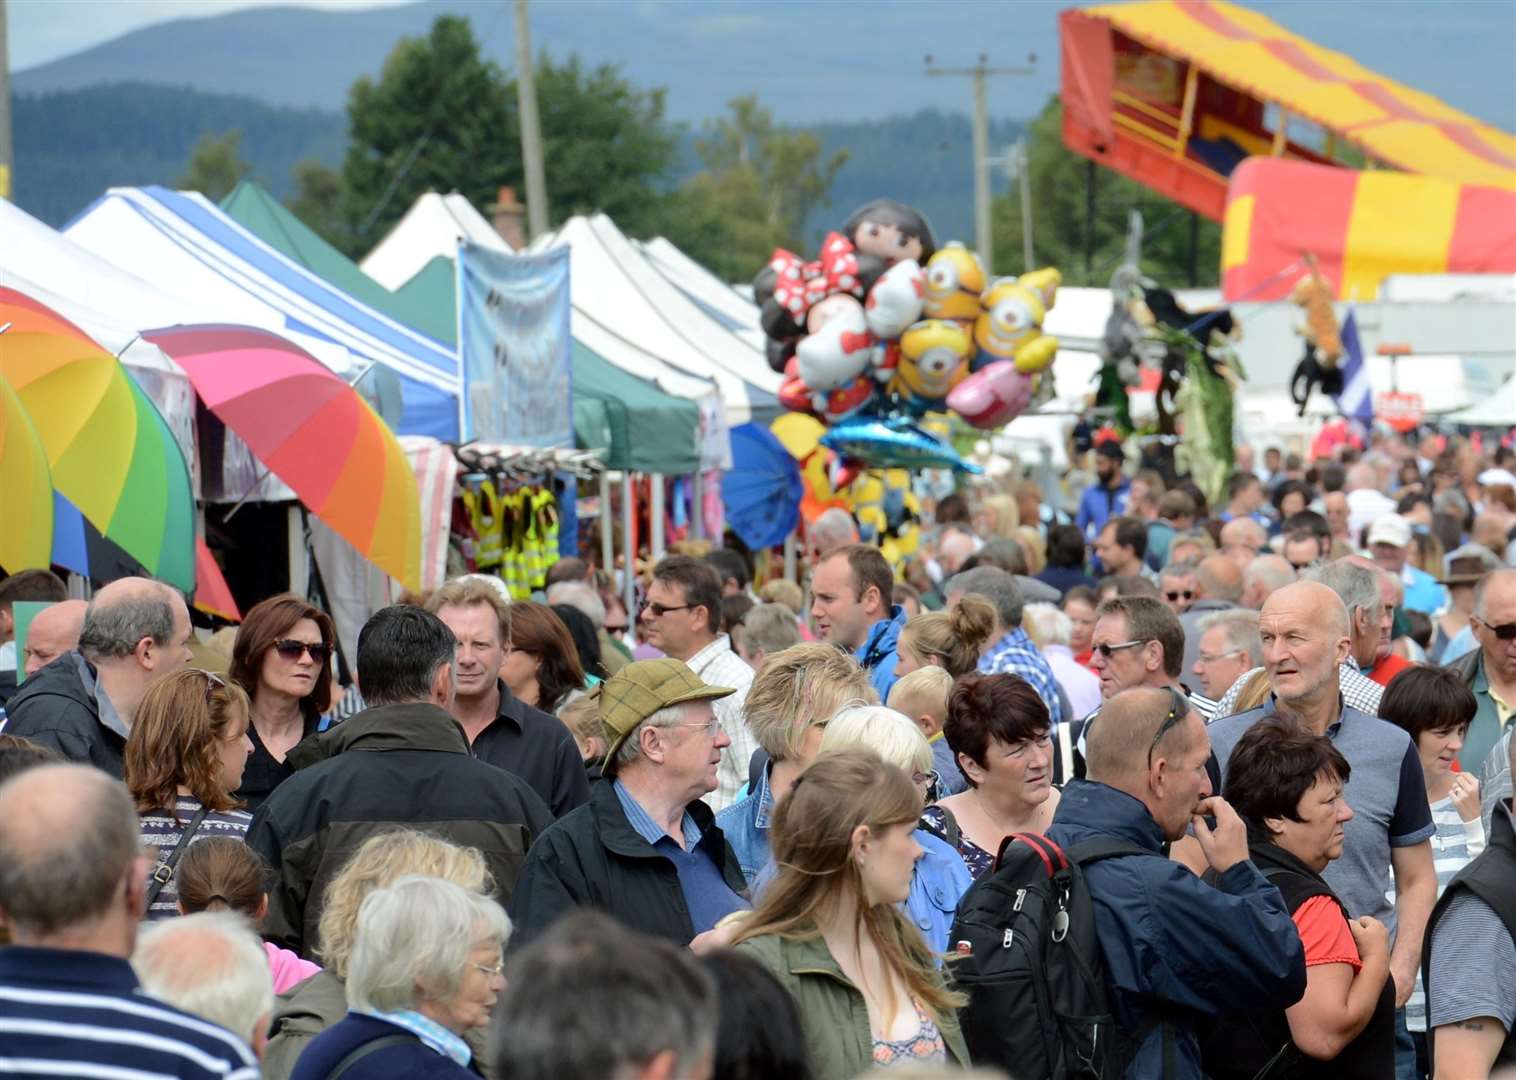 This year's Black Isle Show attracted bumper crowds (file image).